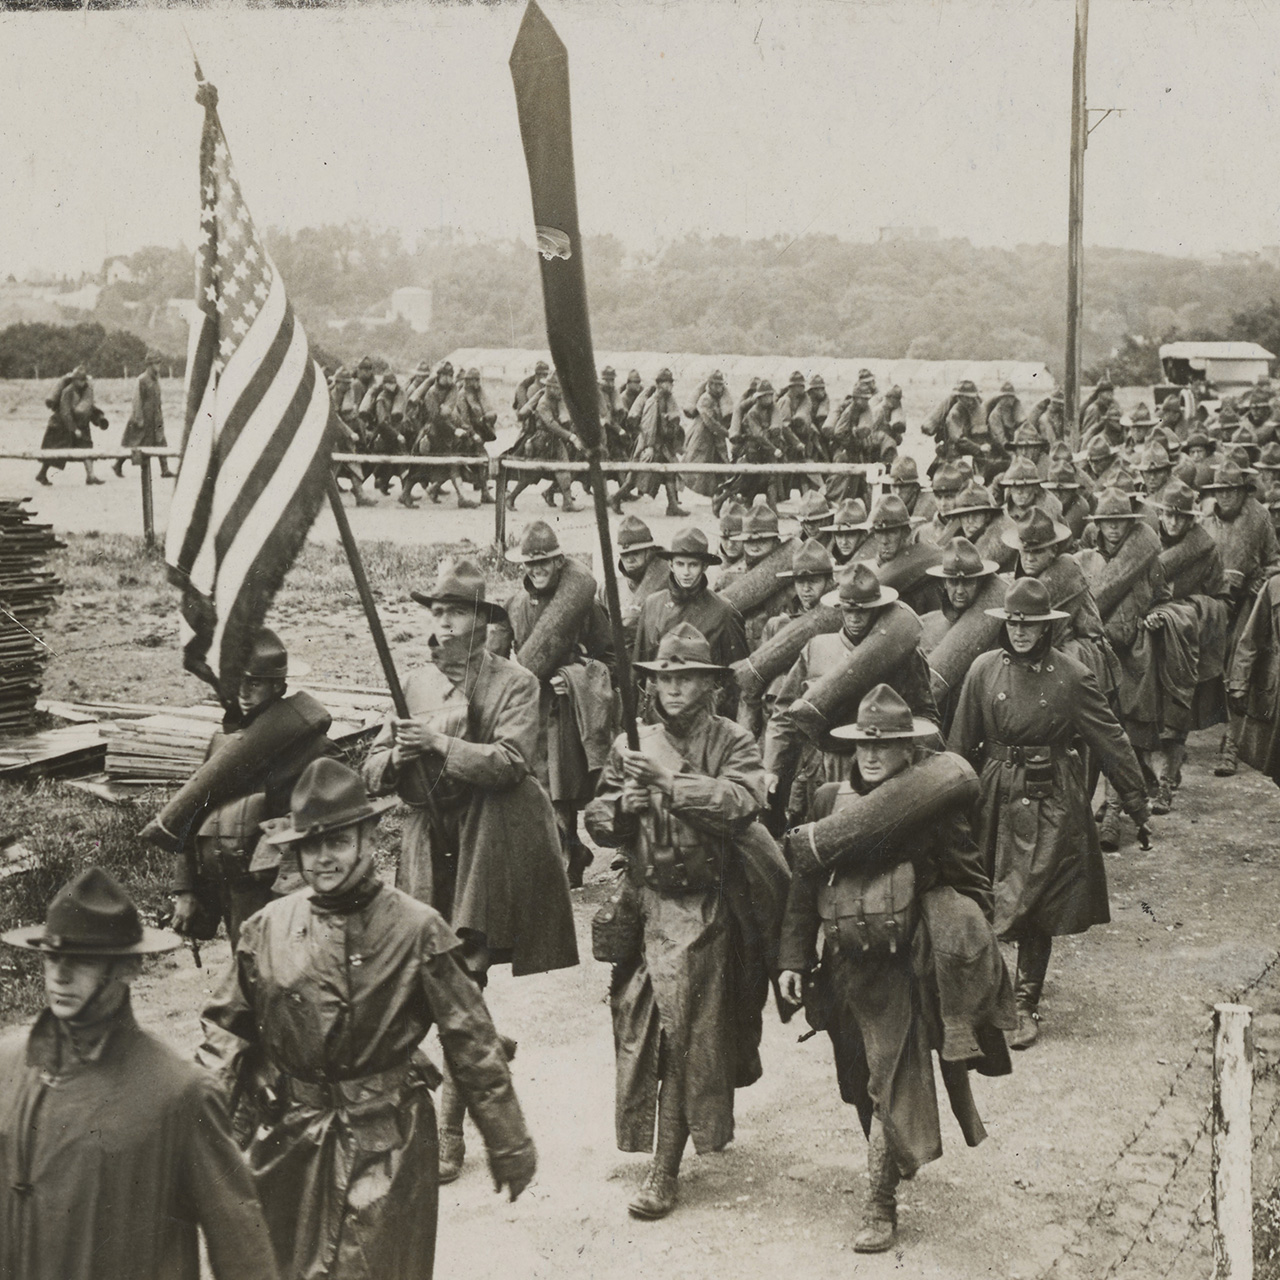 Museum of the American G.I in College Station, Texas - Image of soldiers during WWI Interwar Period 1914-1938